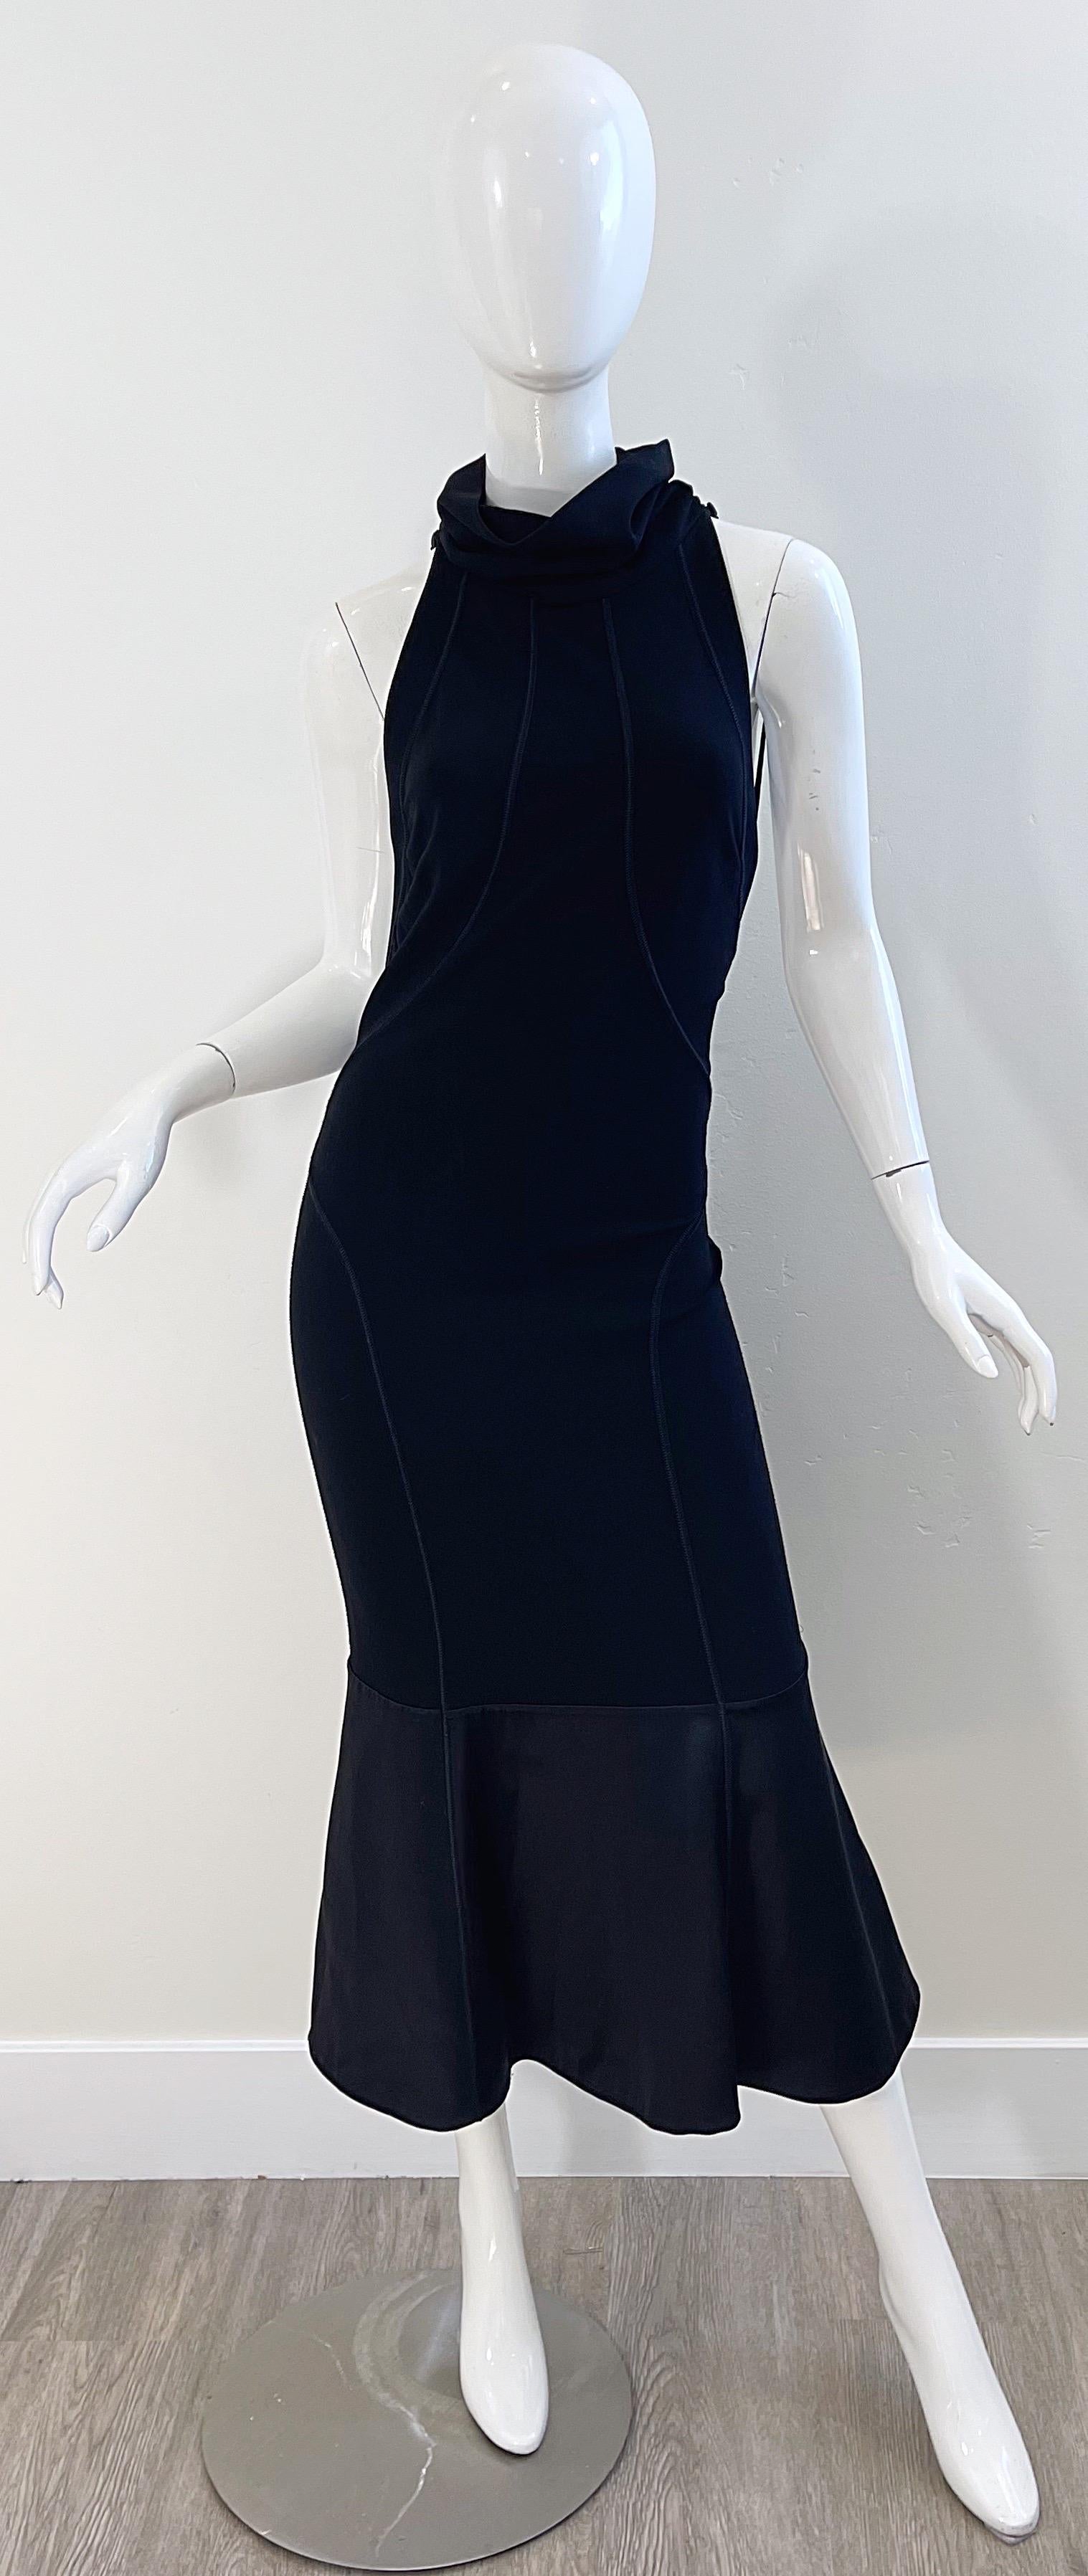 Sexy late 1990s GIANFRANCO FERRE black jersey racerback midi dress ! Features. A draped high neck with a tailored bodice. The back reveals just the right amount of skin. Hidden zipper up the back of the skirt with hook-and-eye closure. 
The perfect